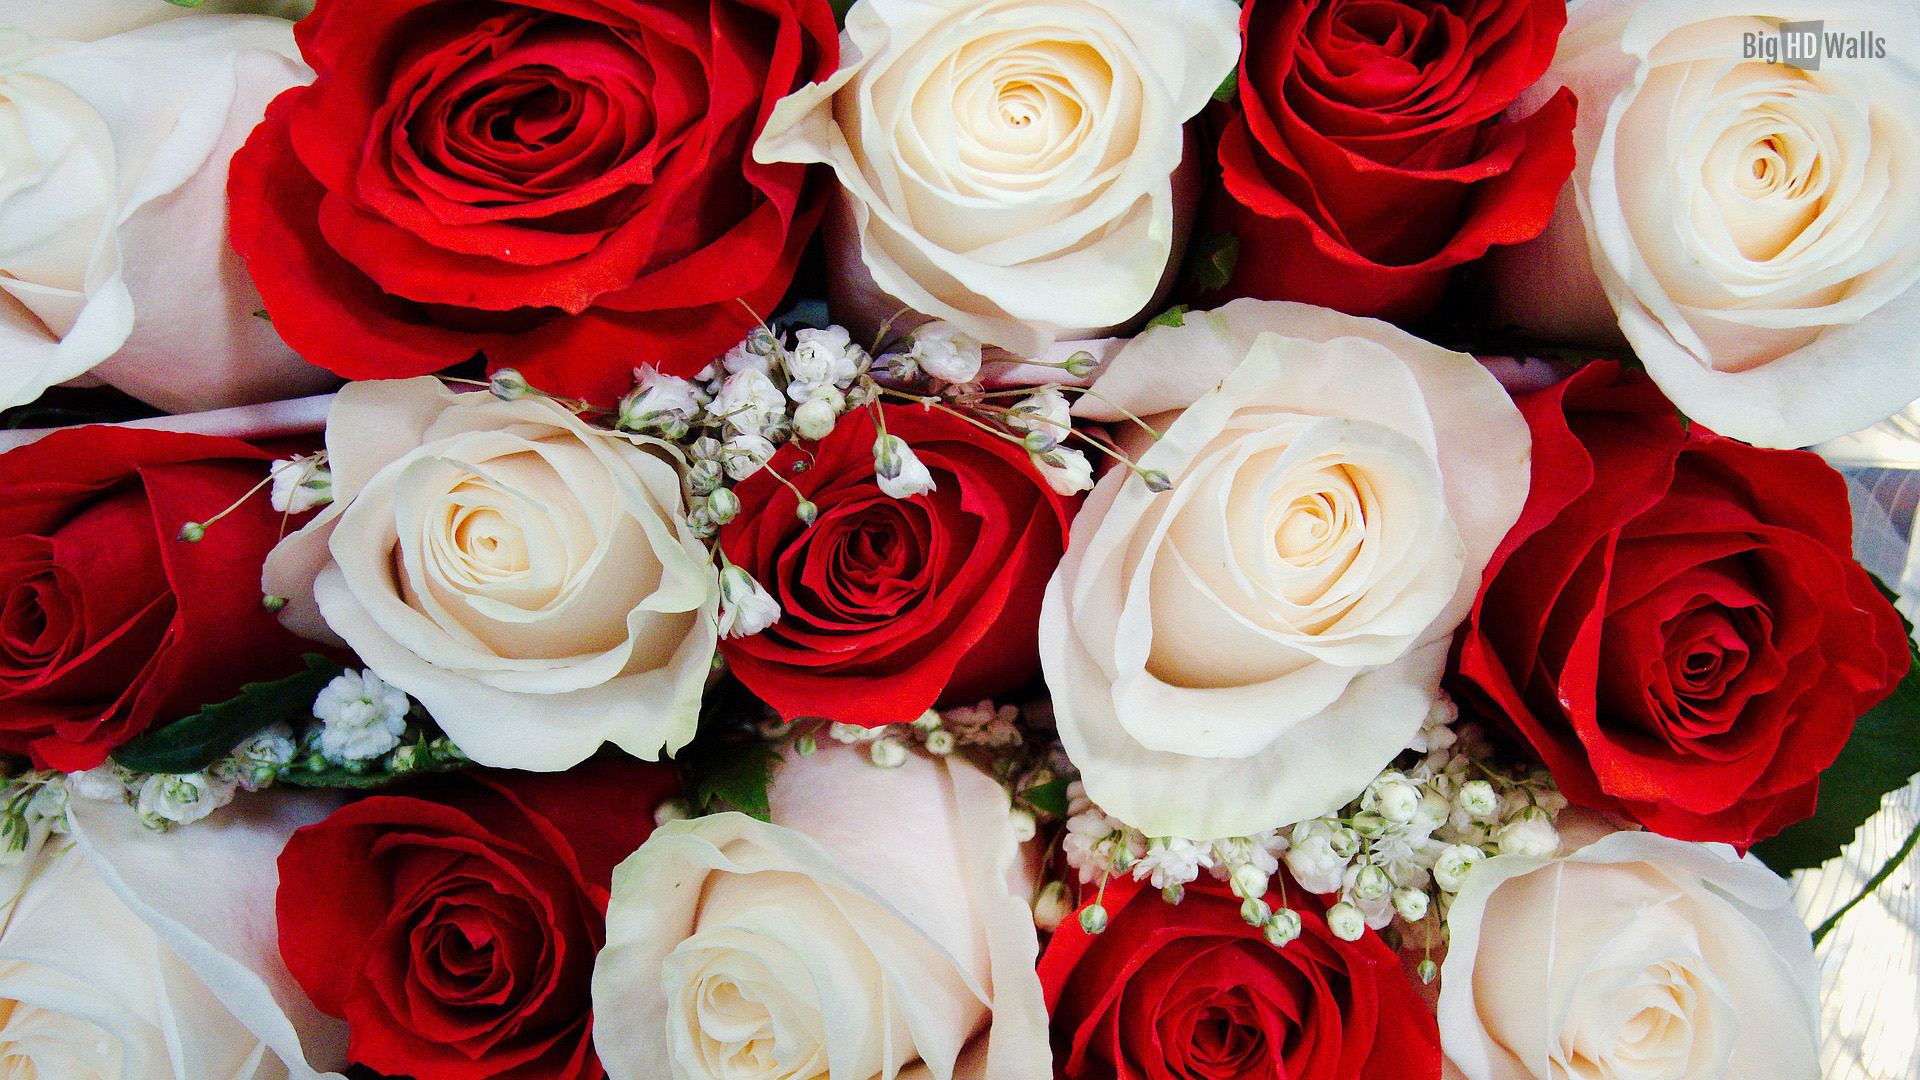 Beautiful red and white roses HD Wallpaper Click on image to enlarge